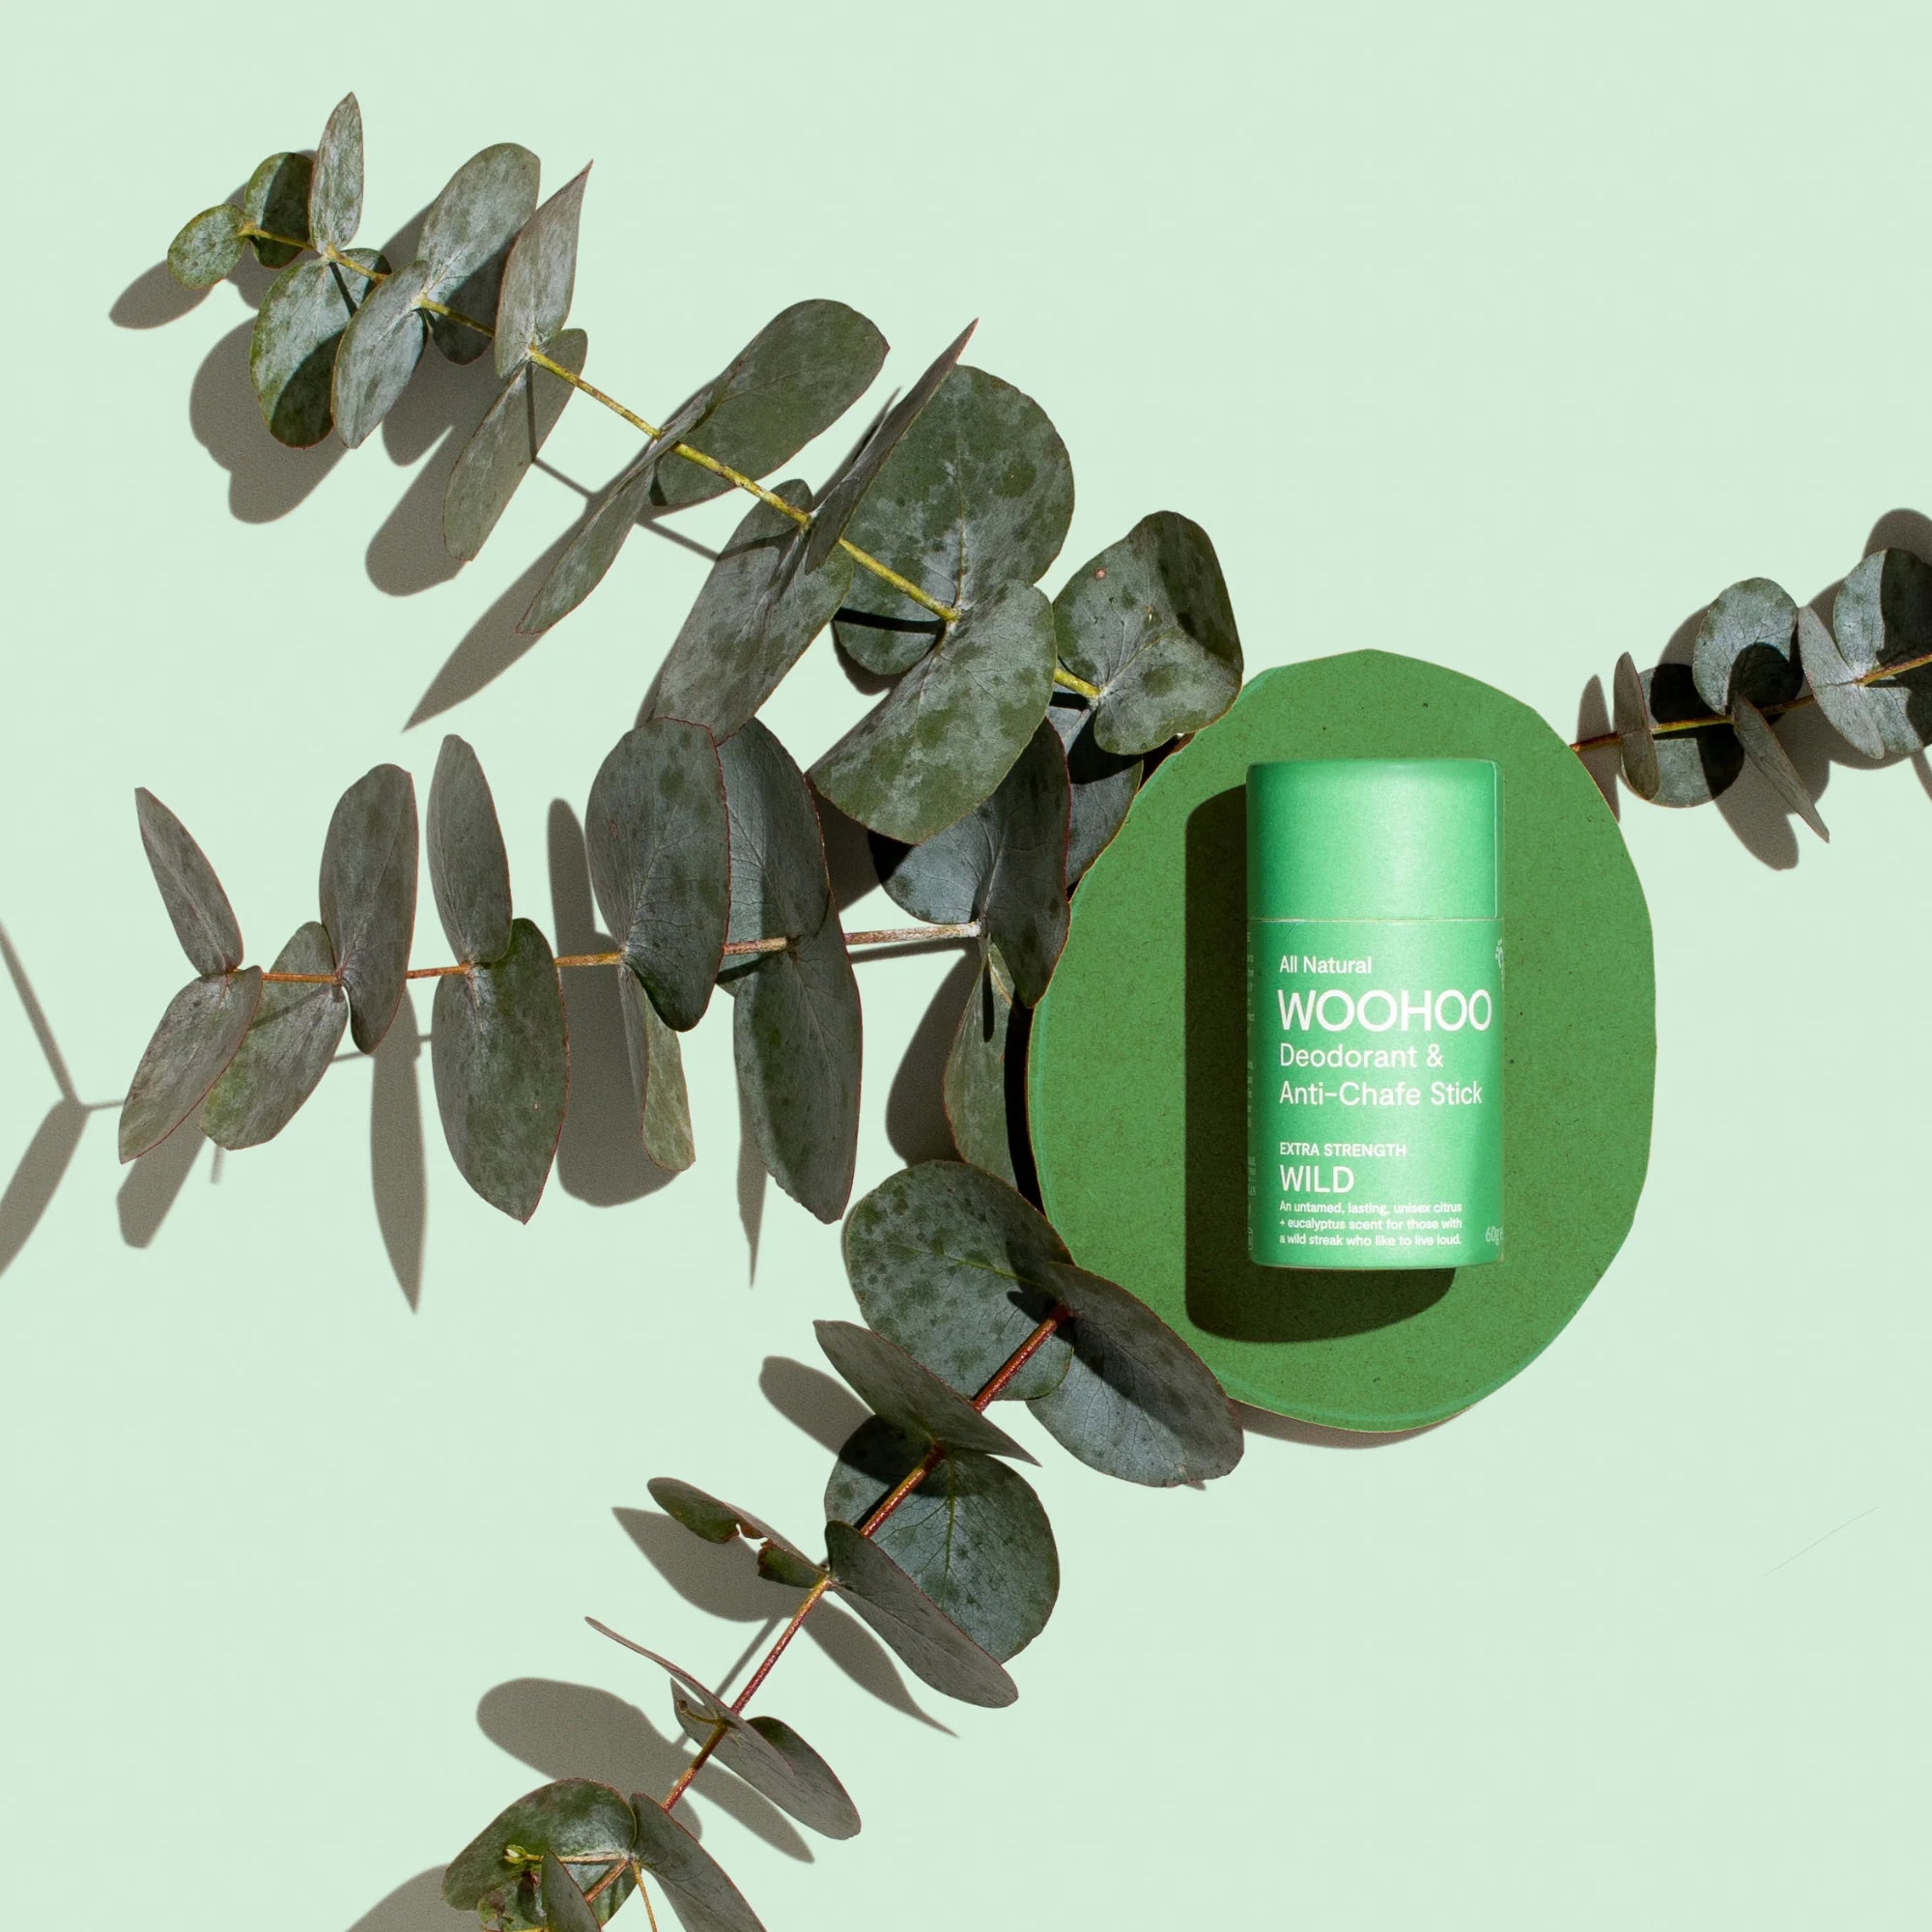 Image of Wild Natural Deodorant Stick laying on eucalyptus to highlight the eucalyptus scent and eucalyptus oil essential ingredient on a light green background